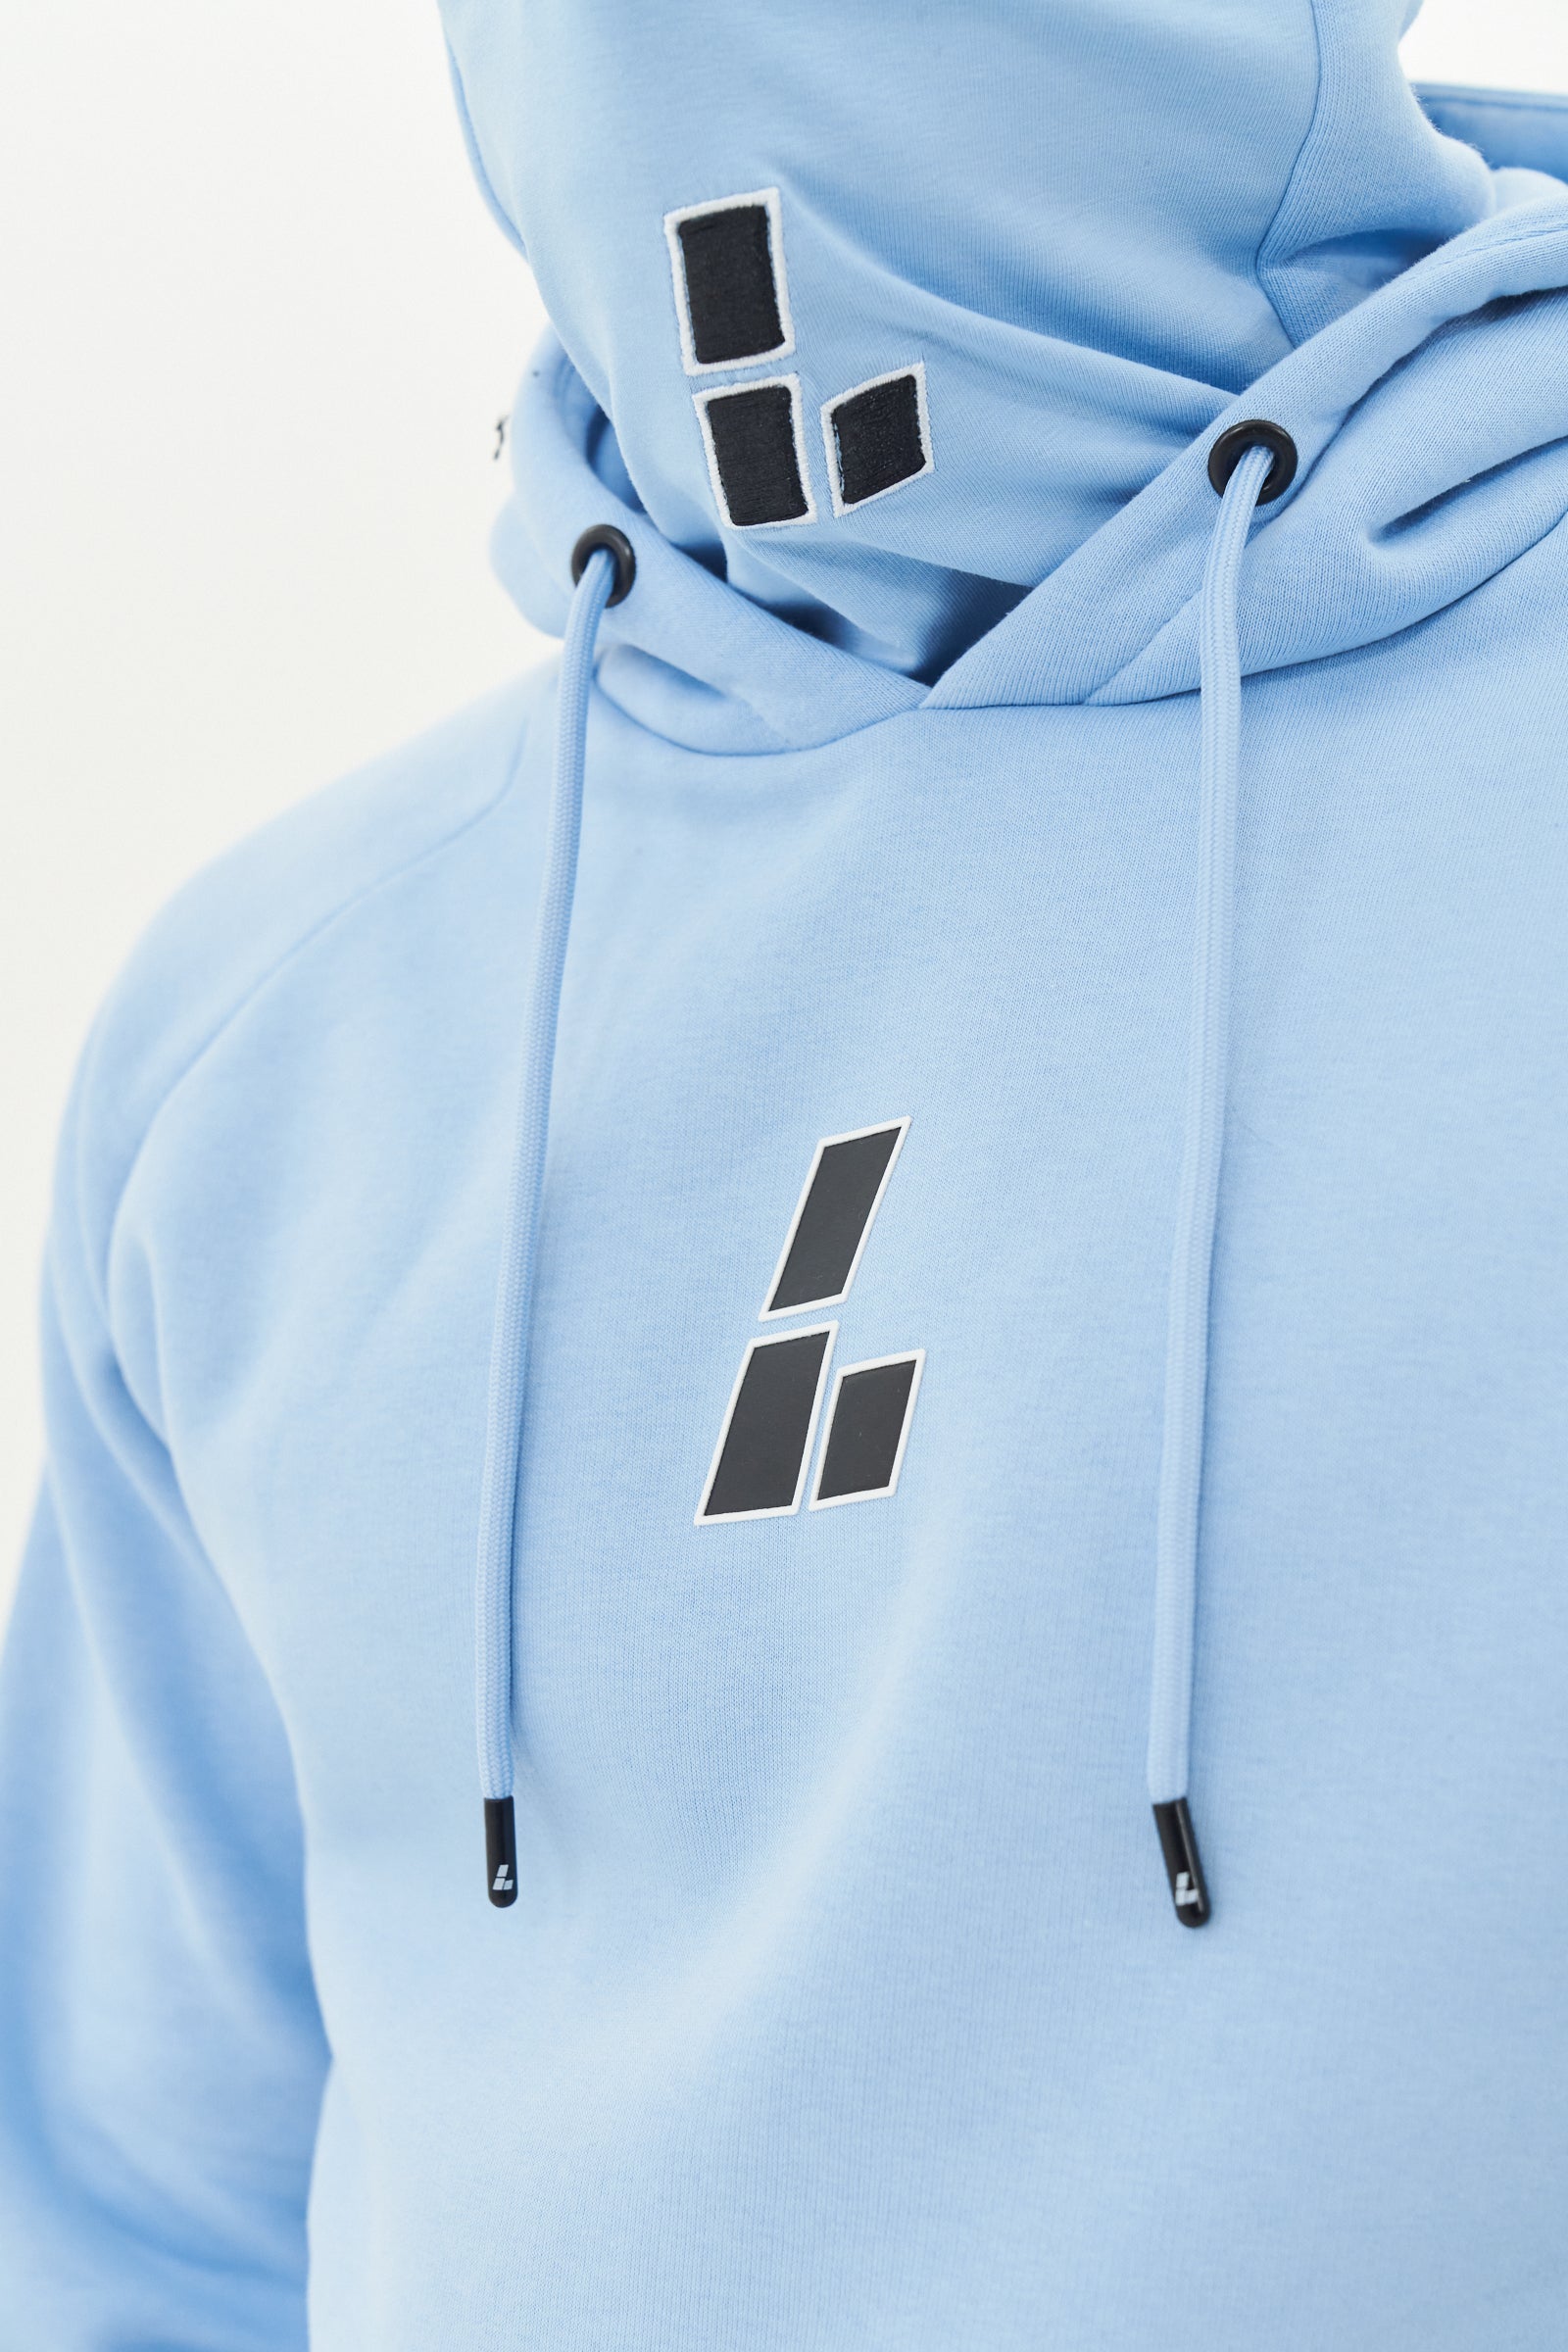 Louis Vuitton Blue Sky White Clouds Hoodie - Tagotee